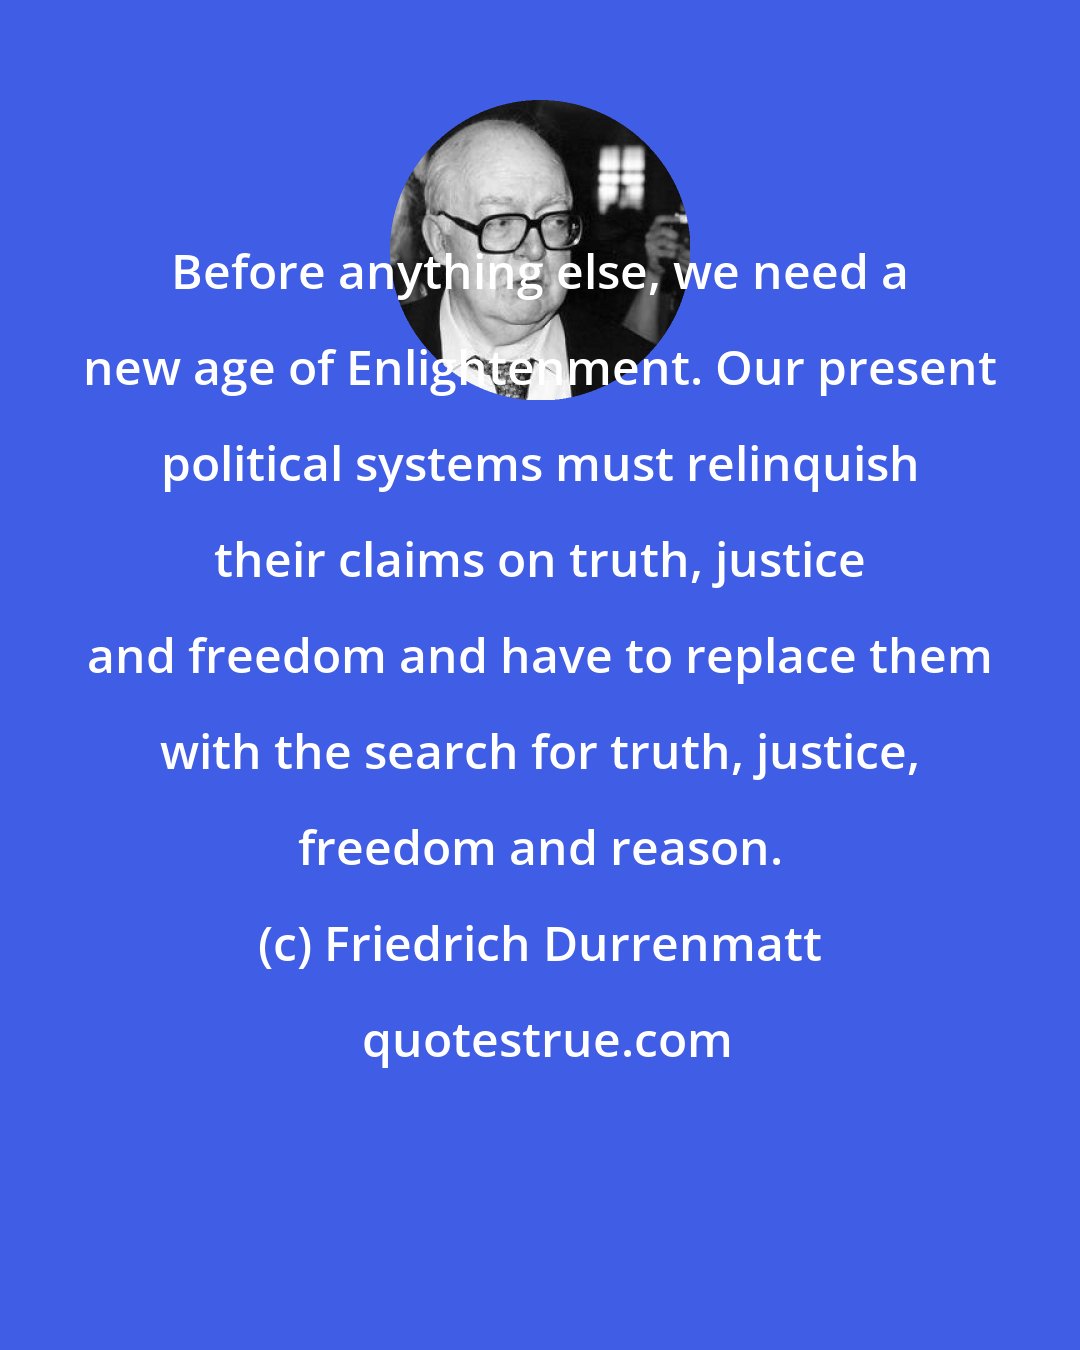 Friedrich Durrenmatt: Before anything else, we need a new age of Enlightenment. Our present political systems must relinquish their claims on truth, justice and freedom and have to replace them with the search for truth, justice, freedom and reason.